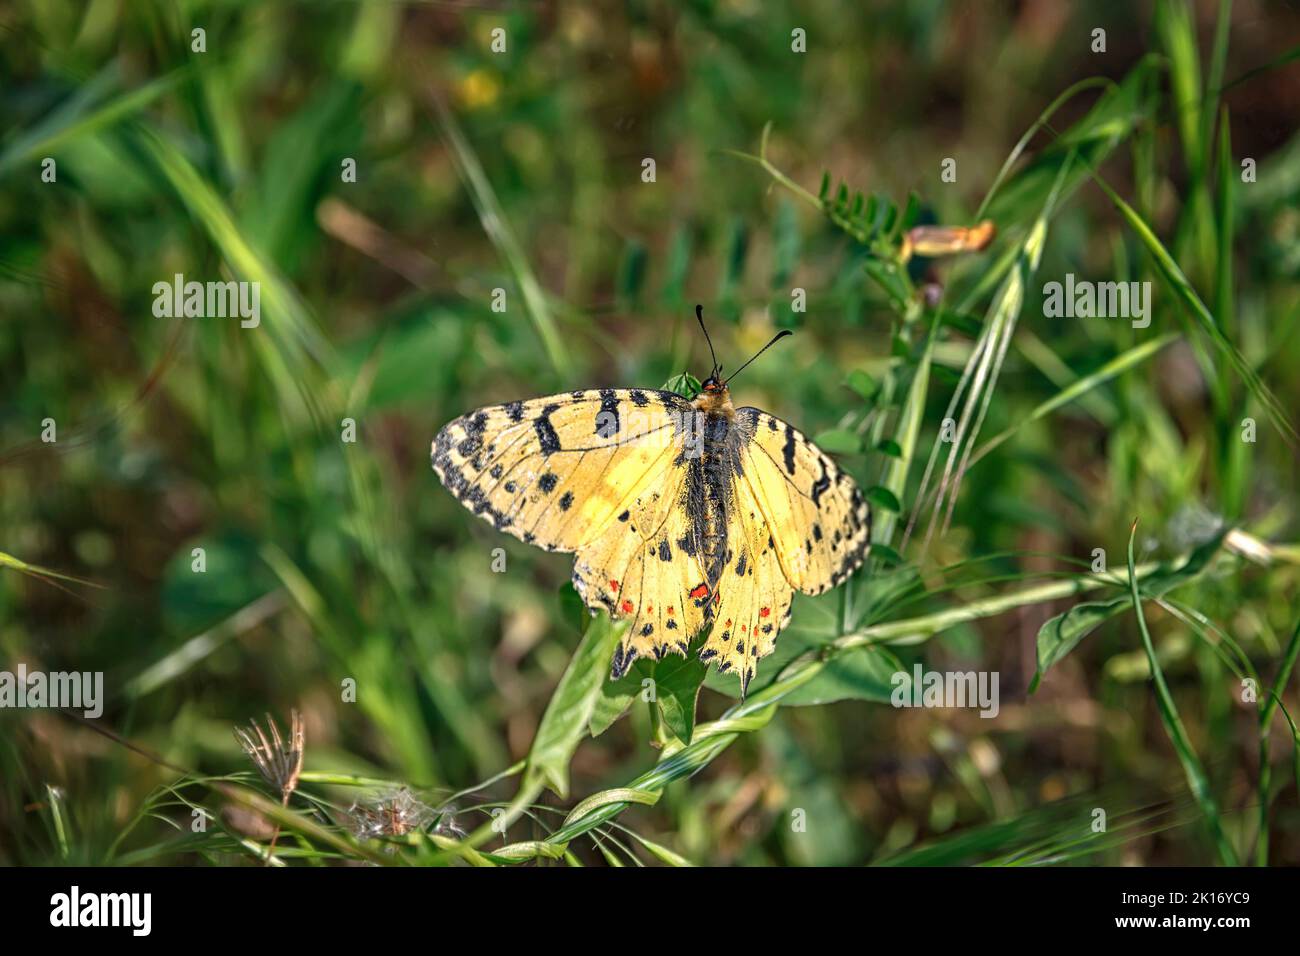 Amazing butterfly perched at green grass Stock Photo